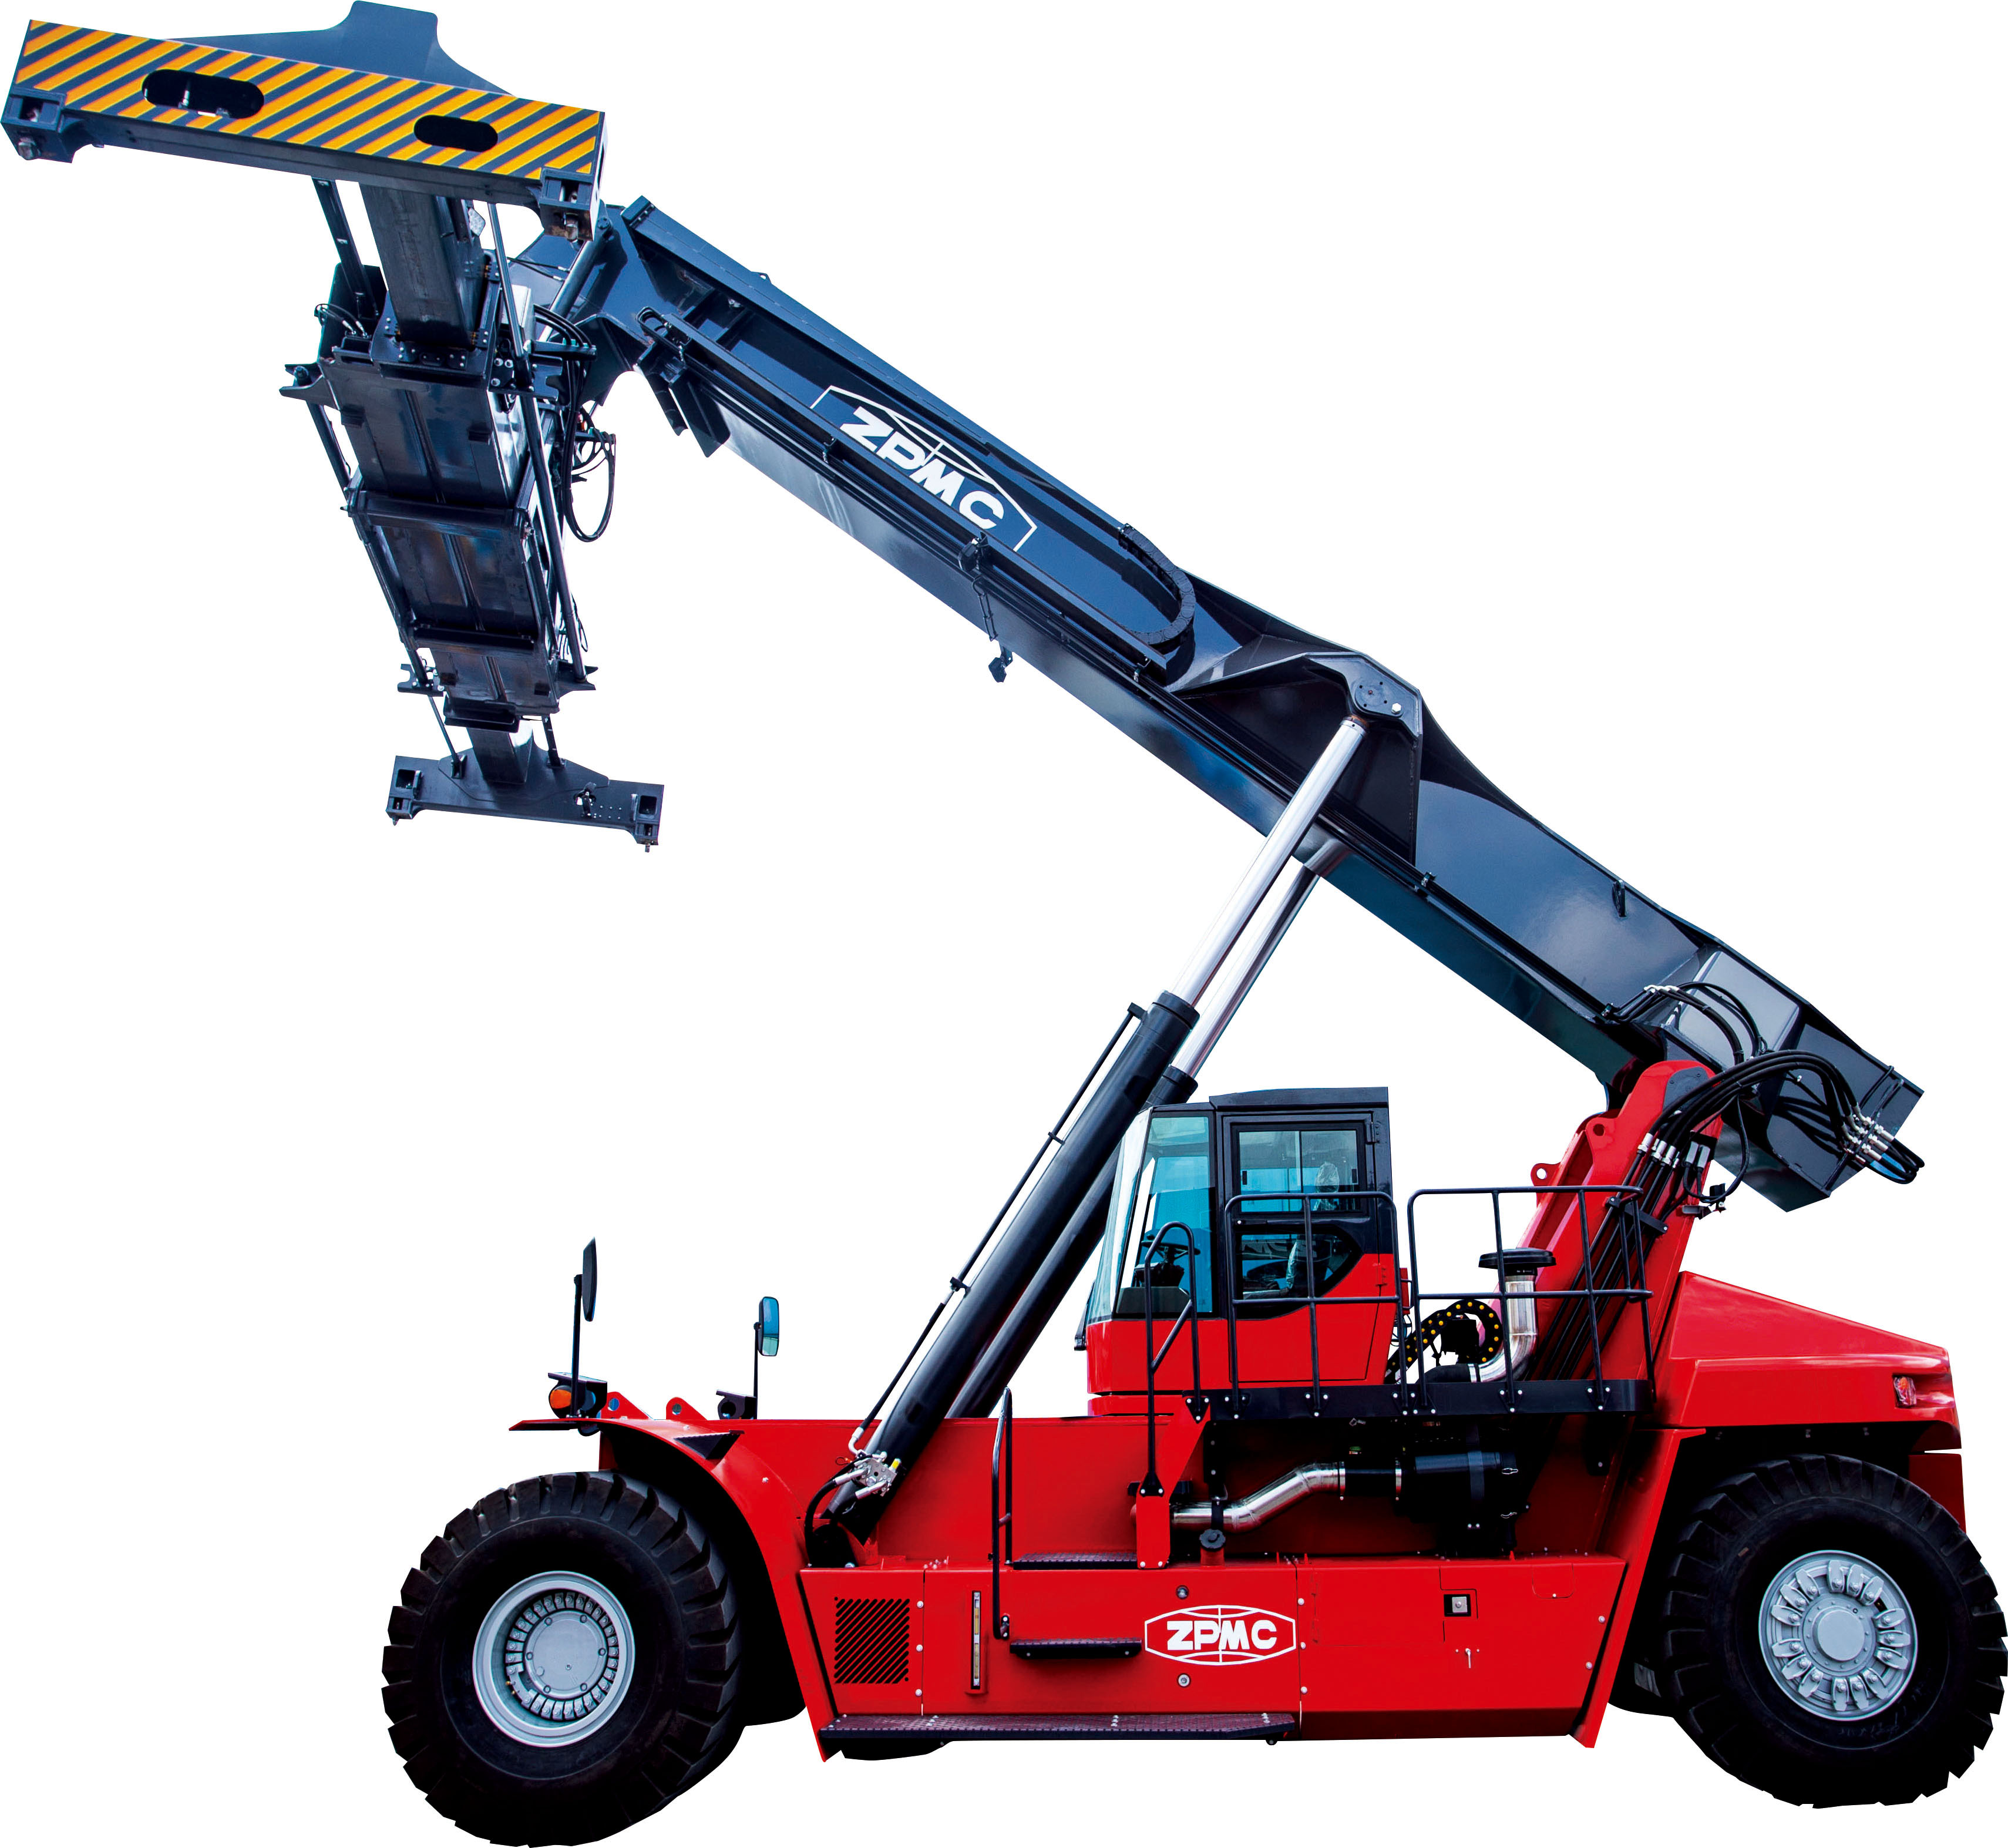 Metal refinery takes delivery of container handling crane - HOIST magazine